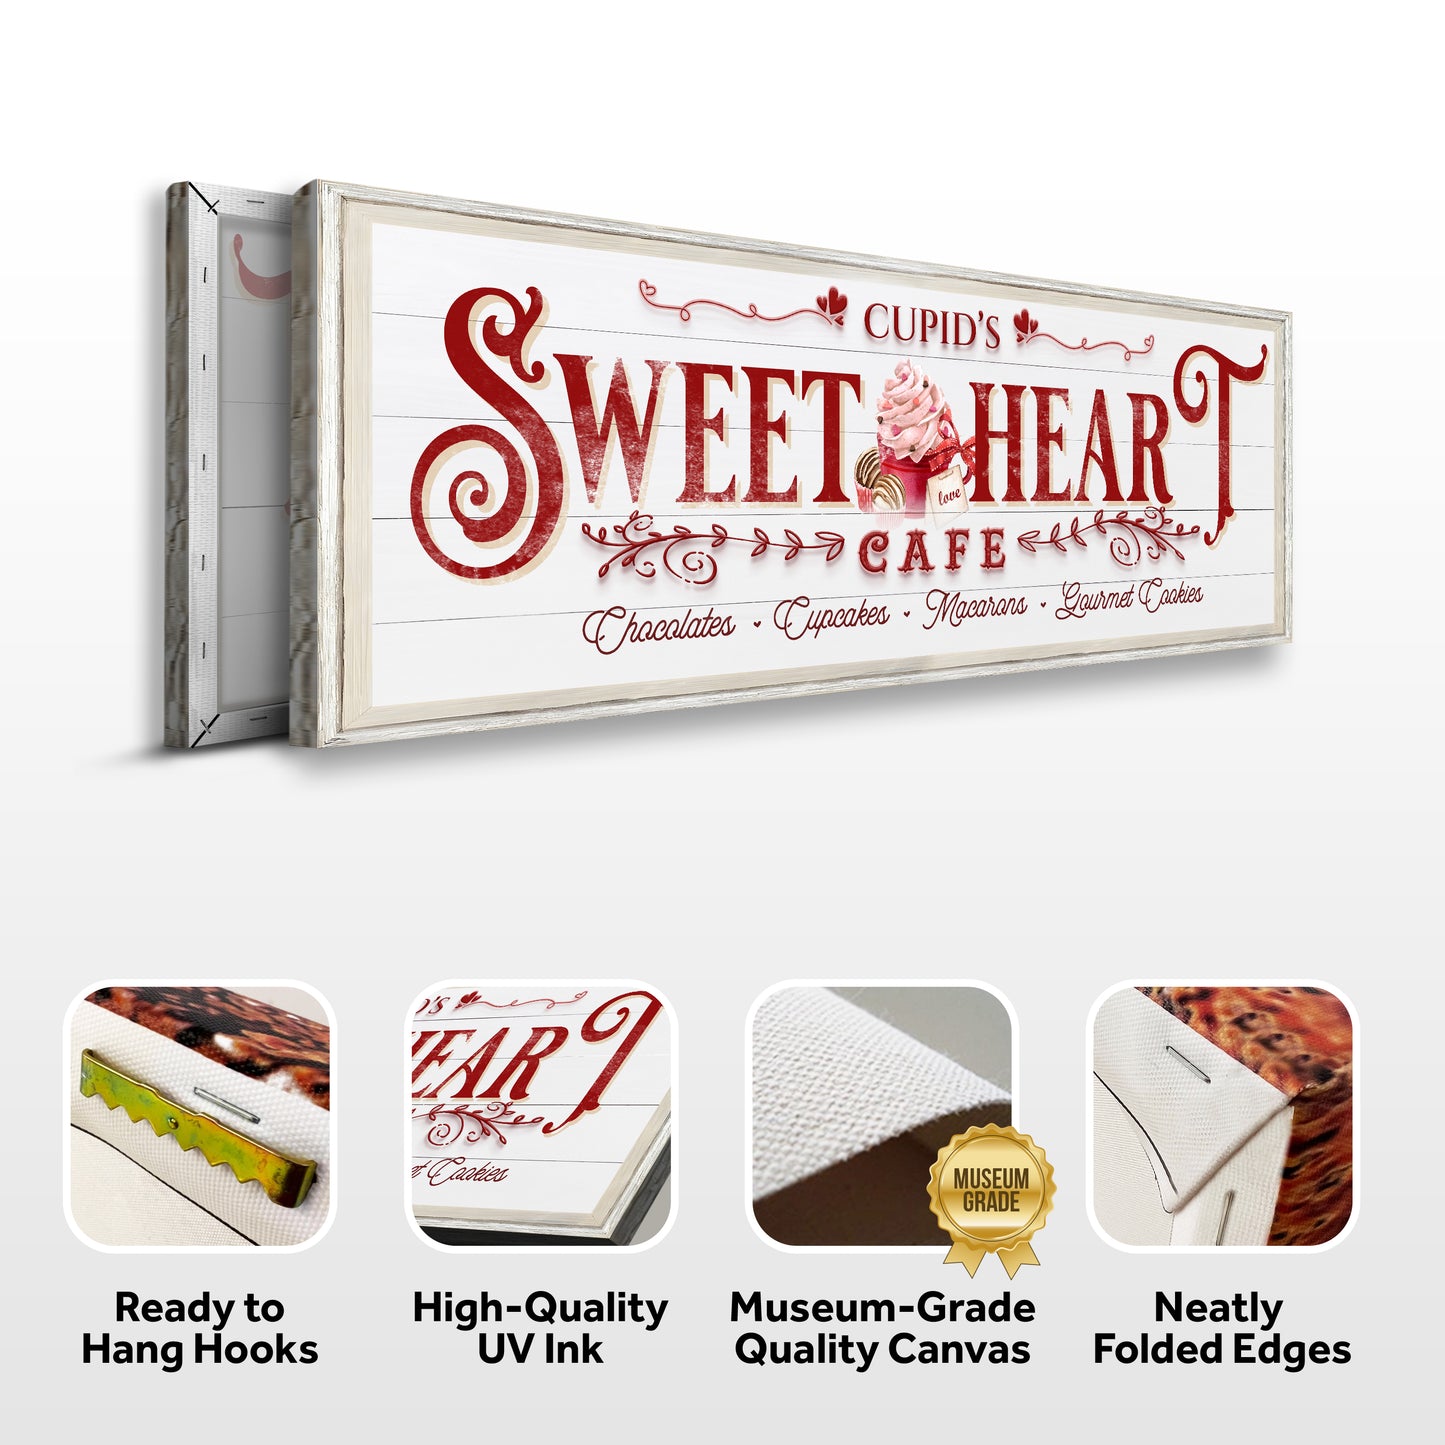 Sweetheart Cafe Sign Specs - Image by Tailored Canvases